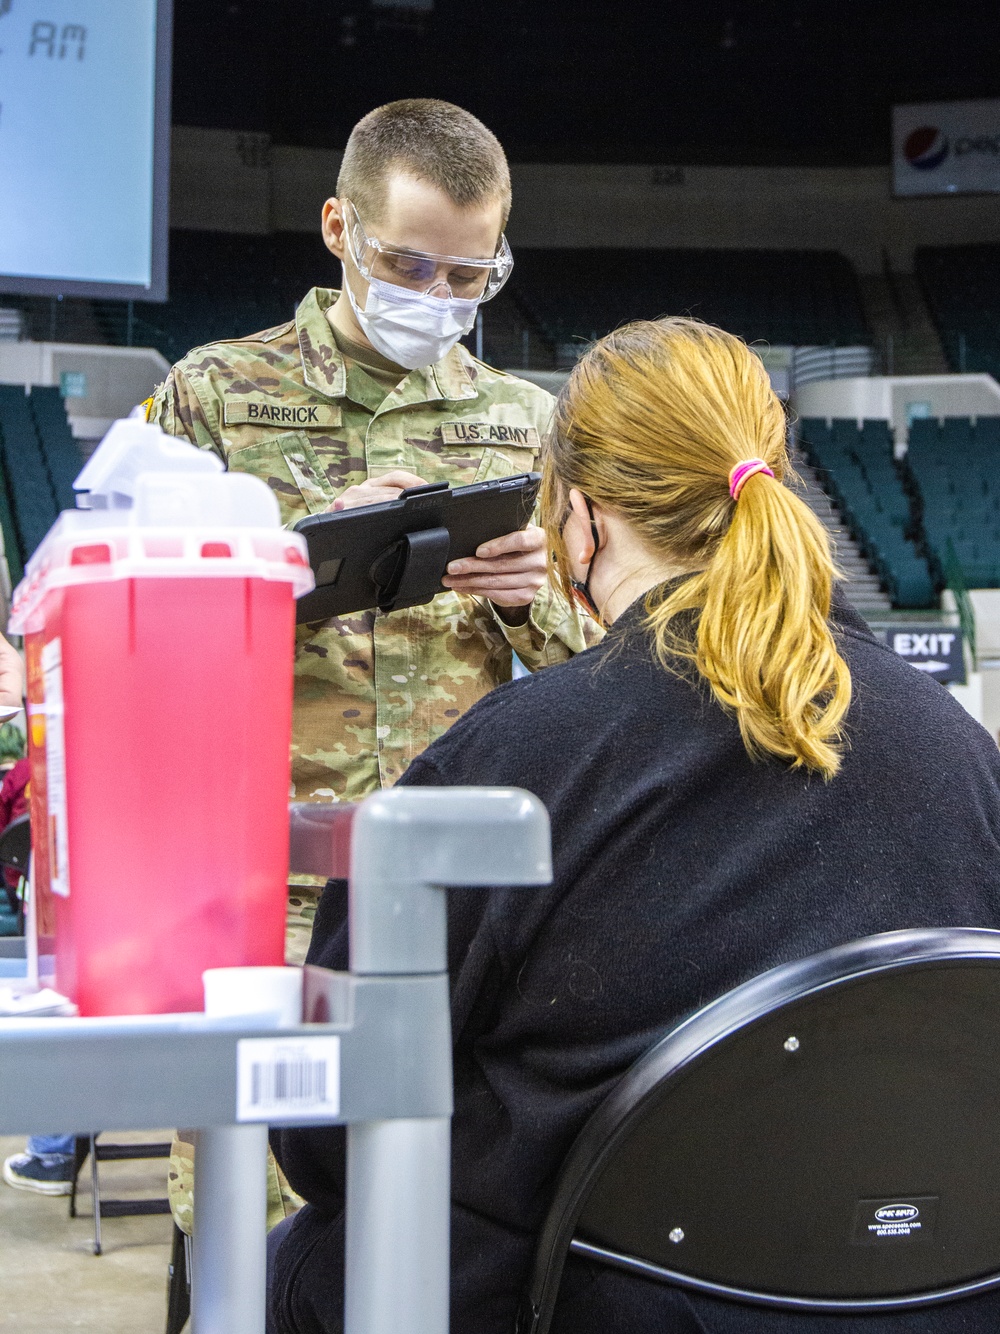 U.S. Army Soldiers administer vaccinations in Cleveland